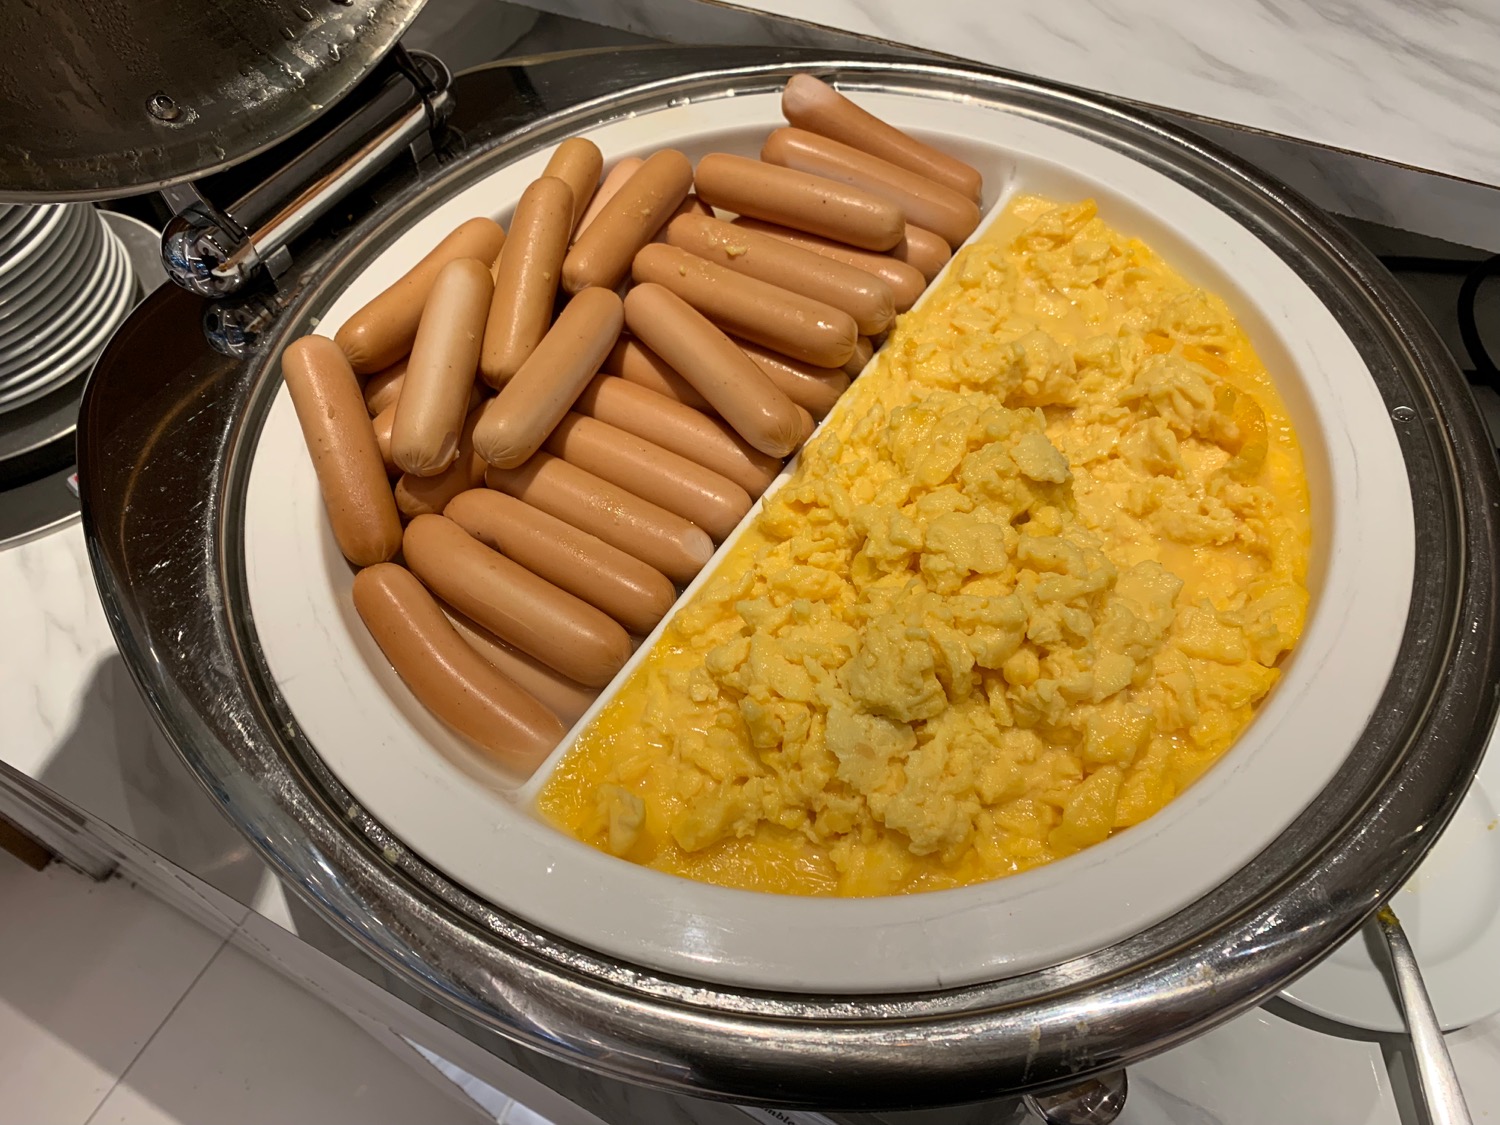 a plate of sausages and scrambled eggs